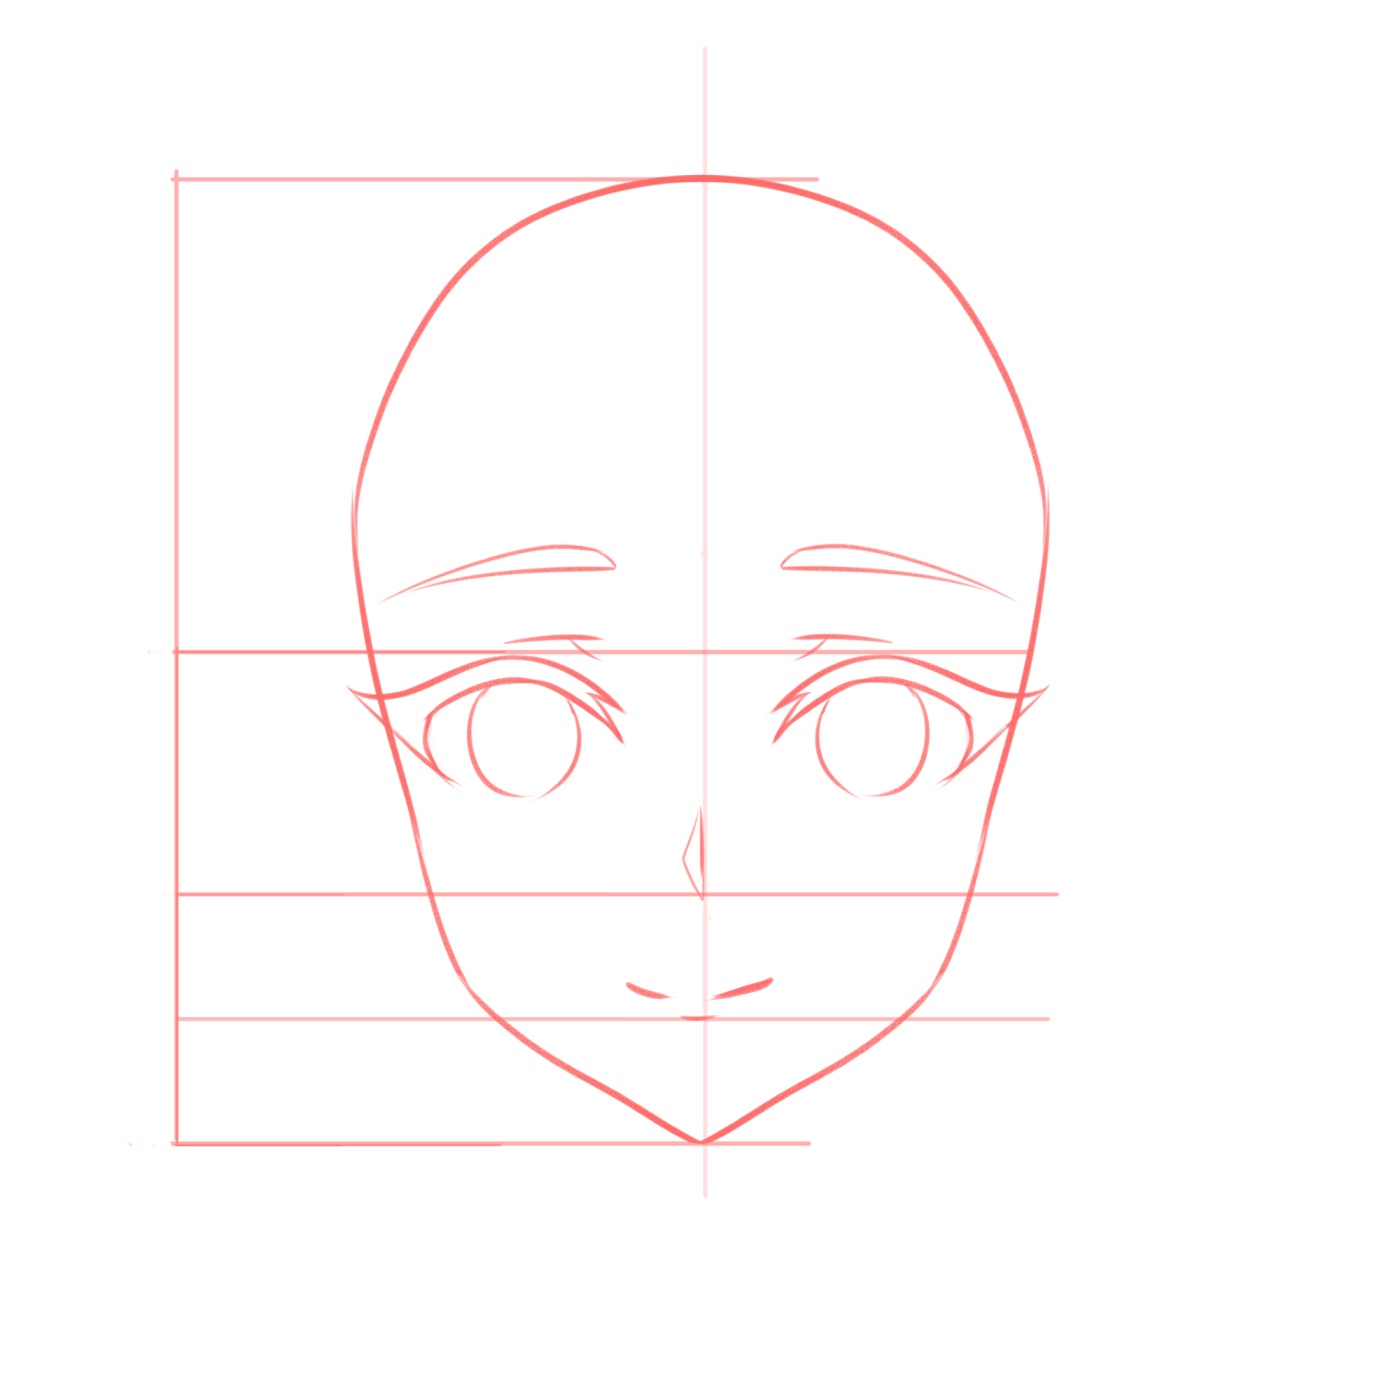 How to draw the head and face – anime-style guideline front view